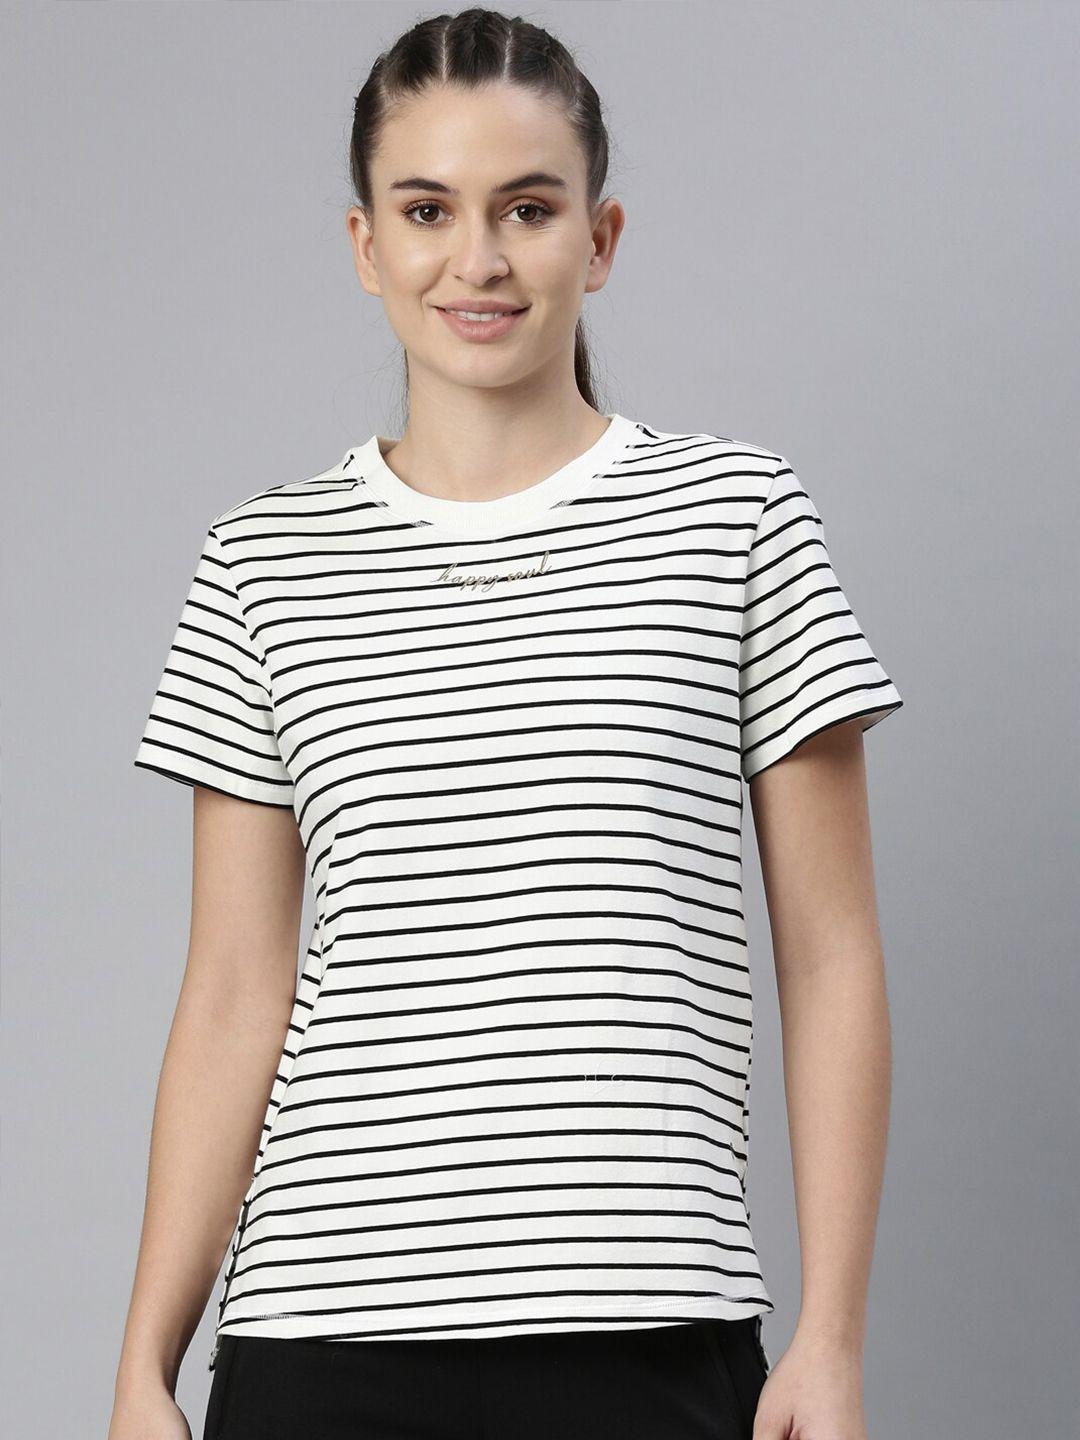 enamor women off white striped antimicrobial cotton outdoor t-shirt